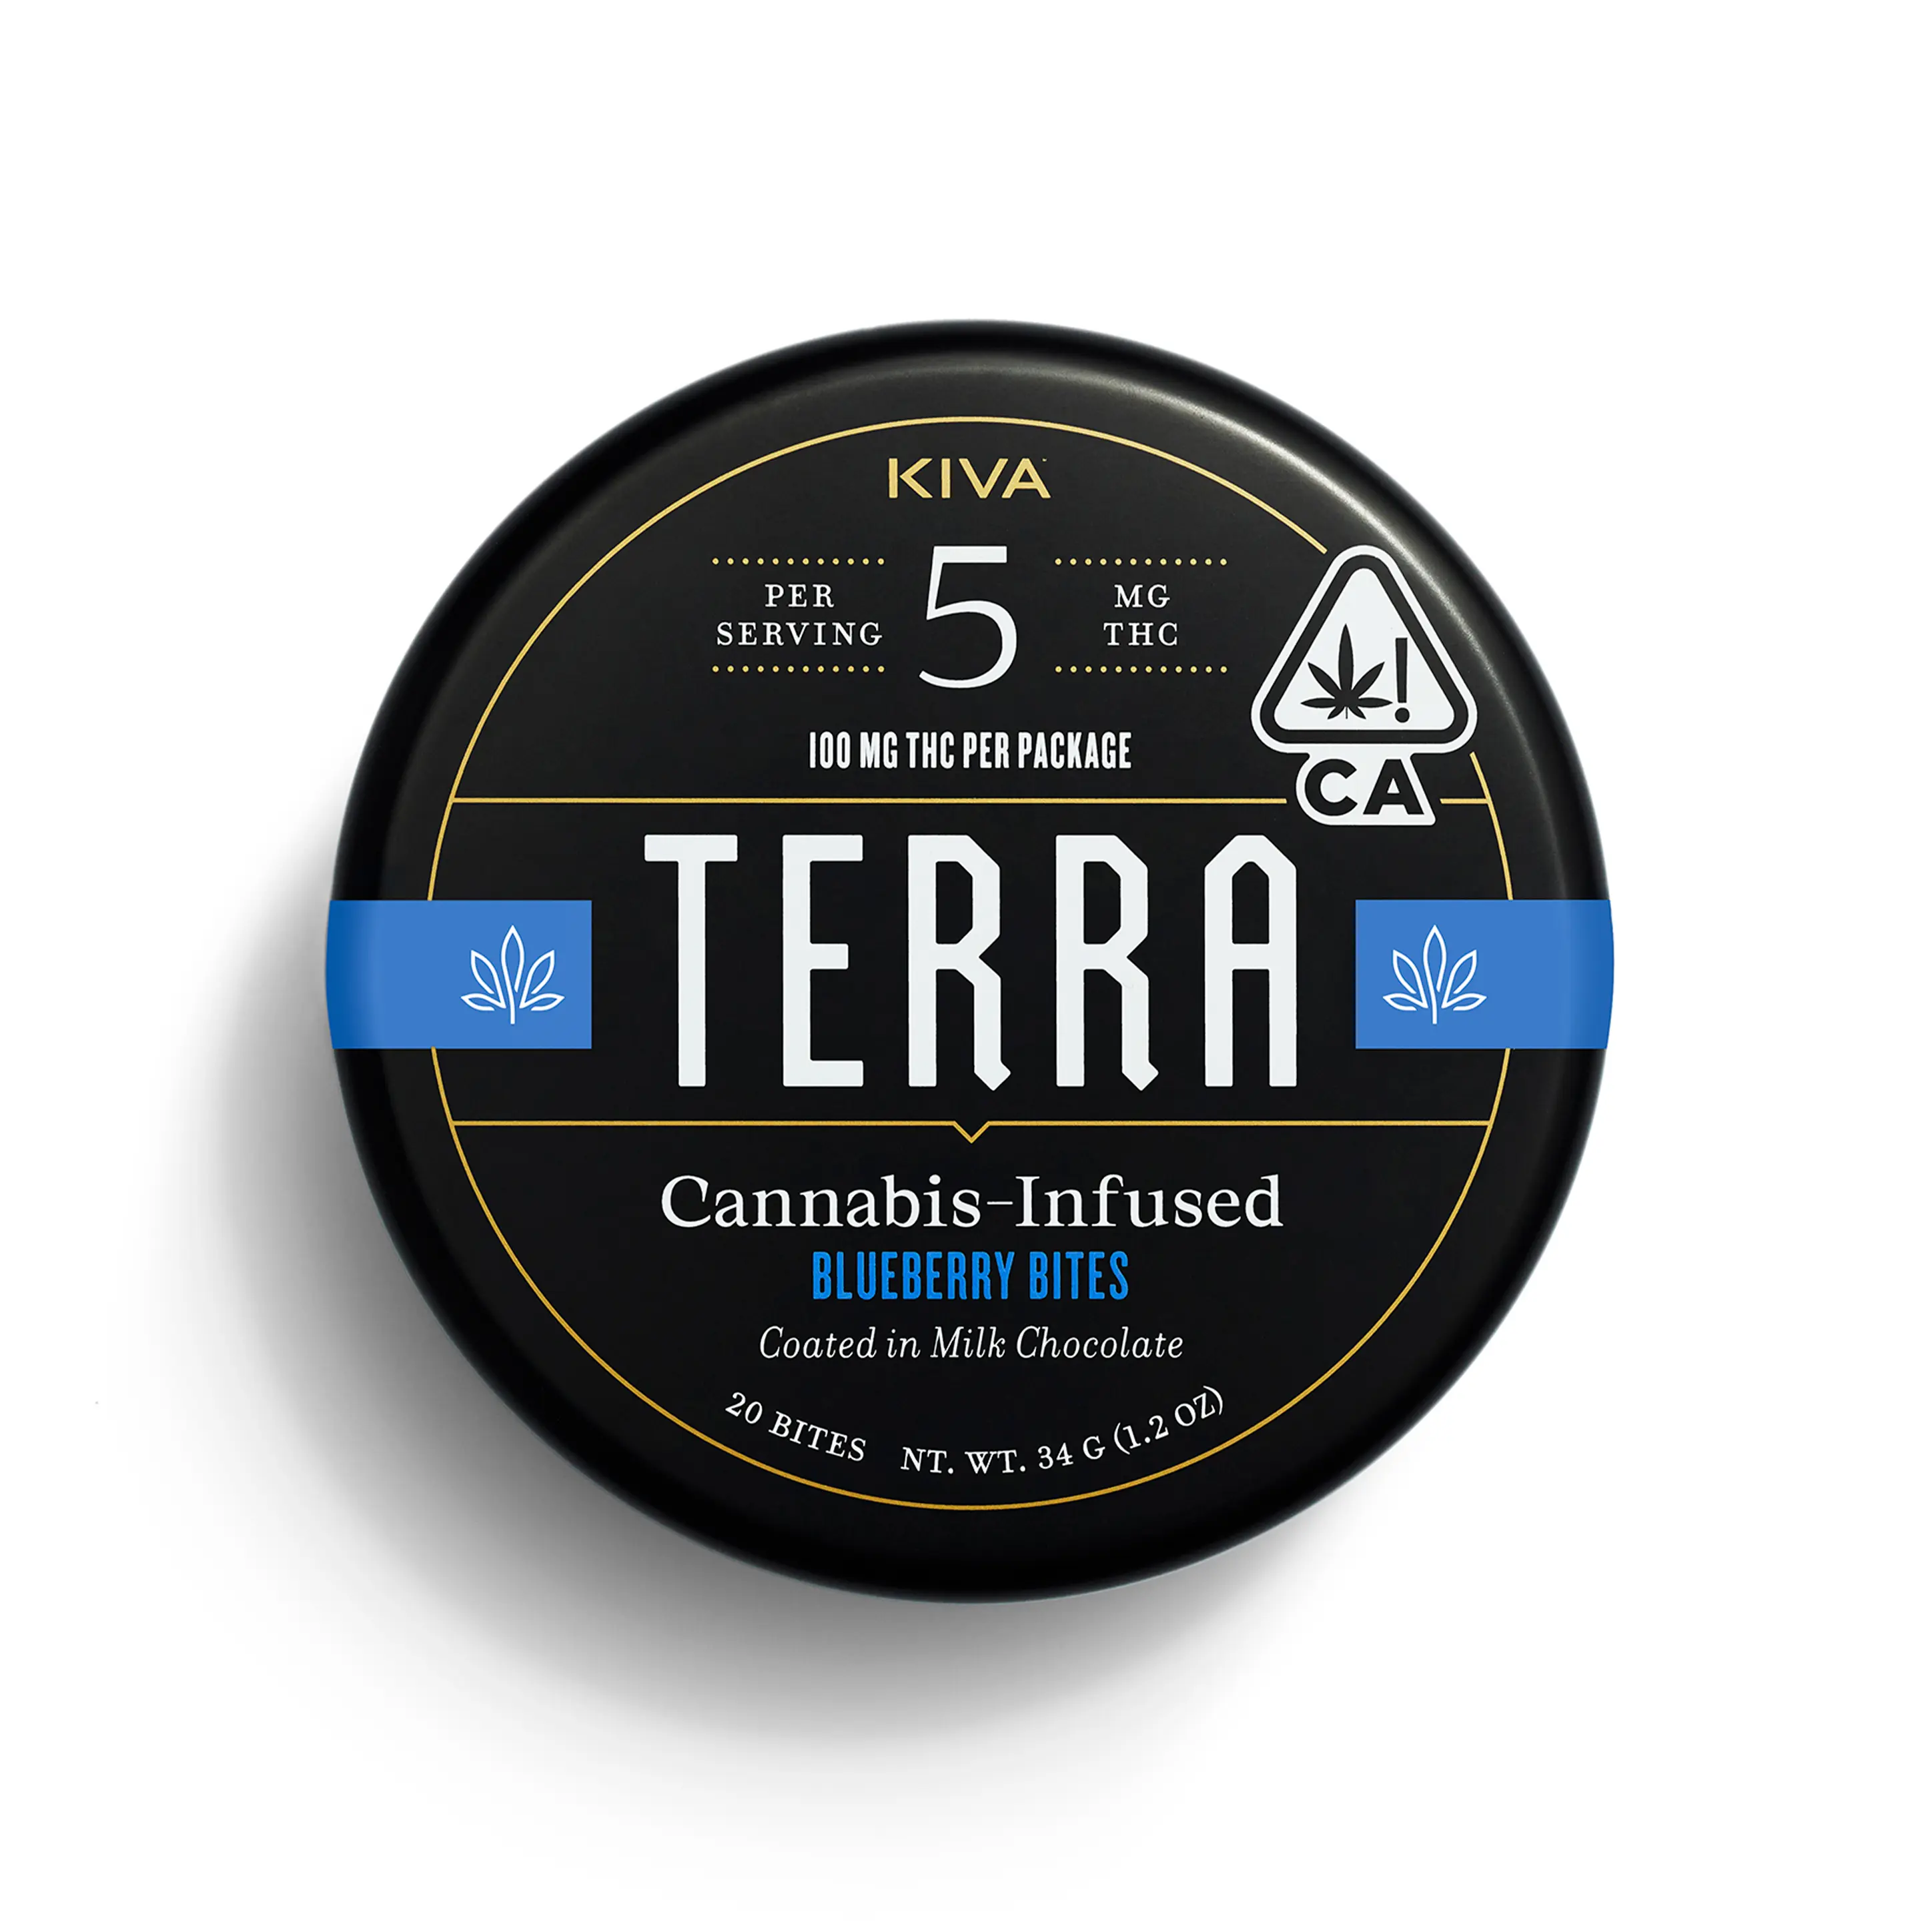 product preview image for Terra Chocolate-Covered Blueberries